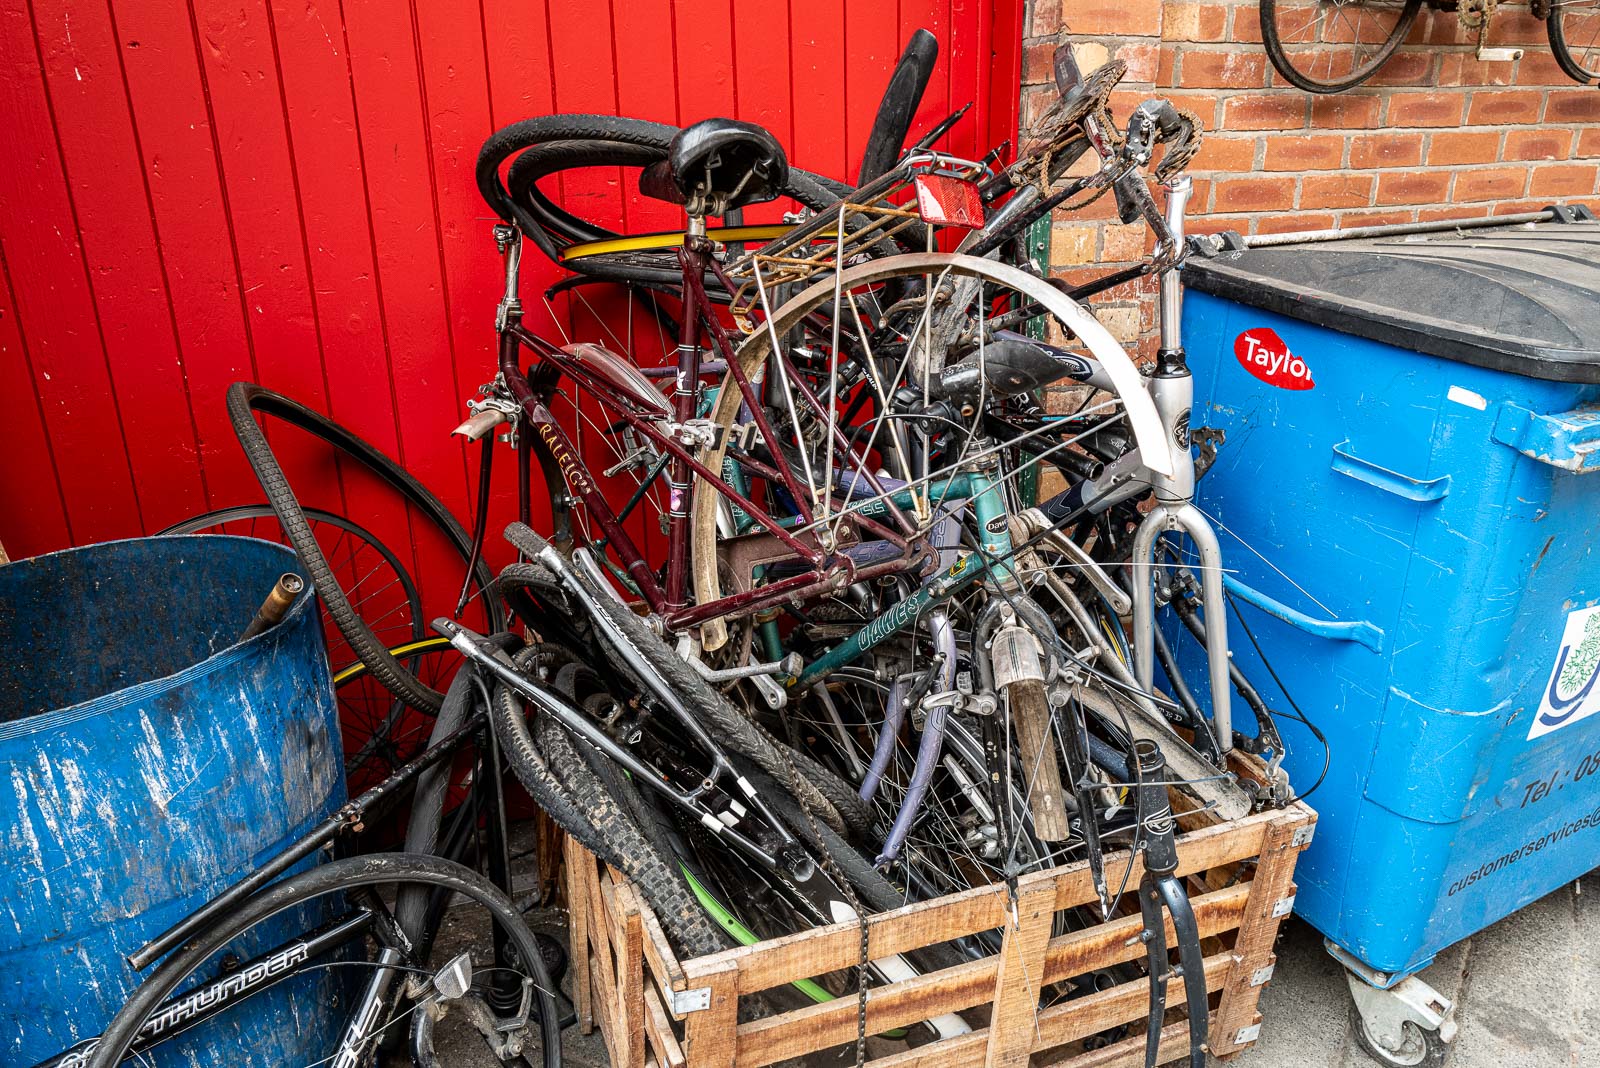 Disposed bicycles, Philip Dearle